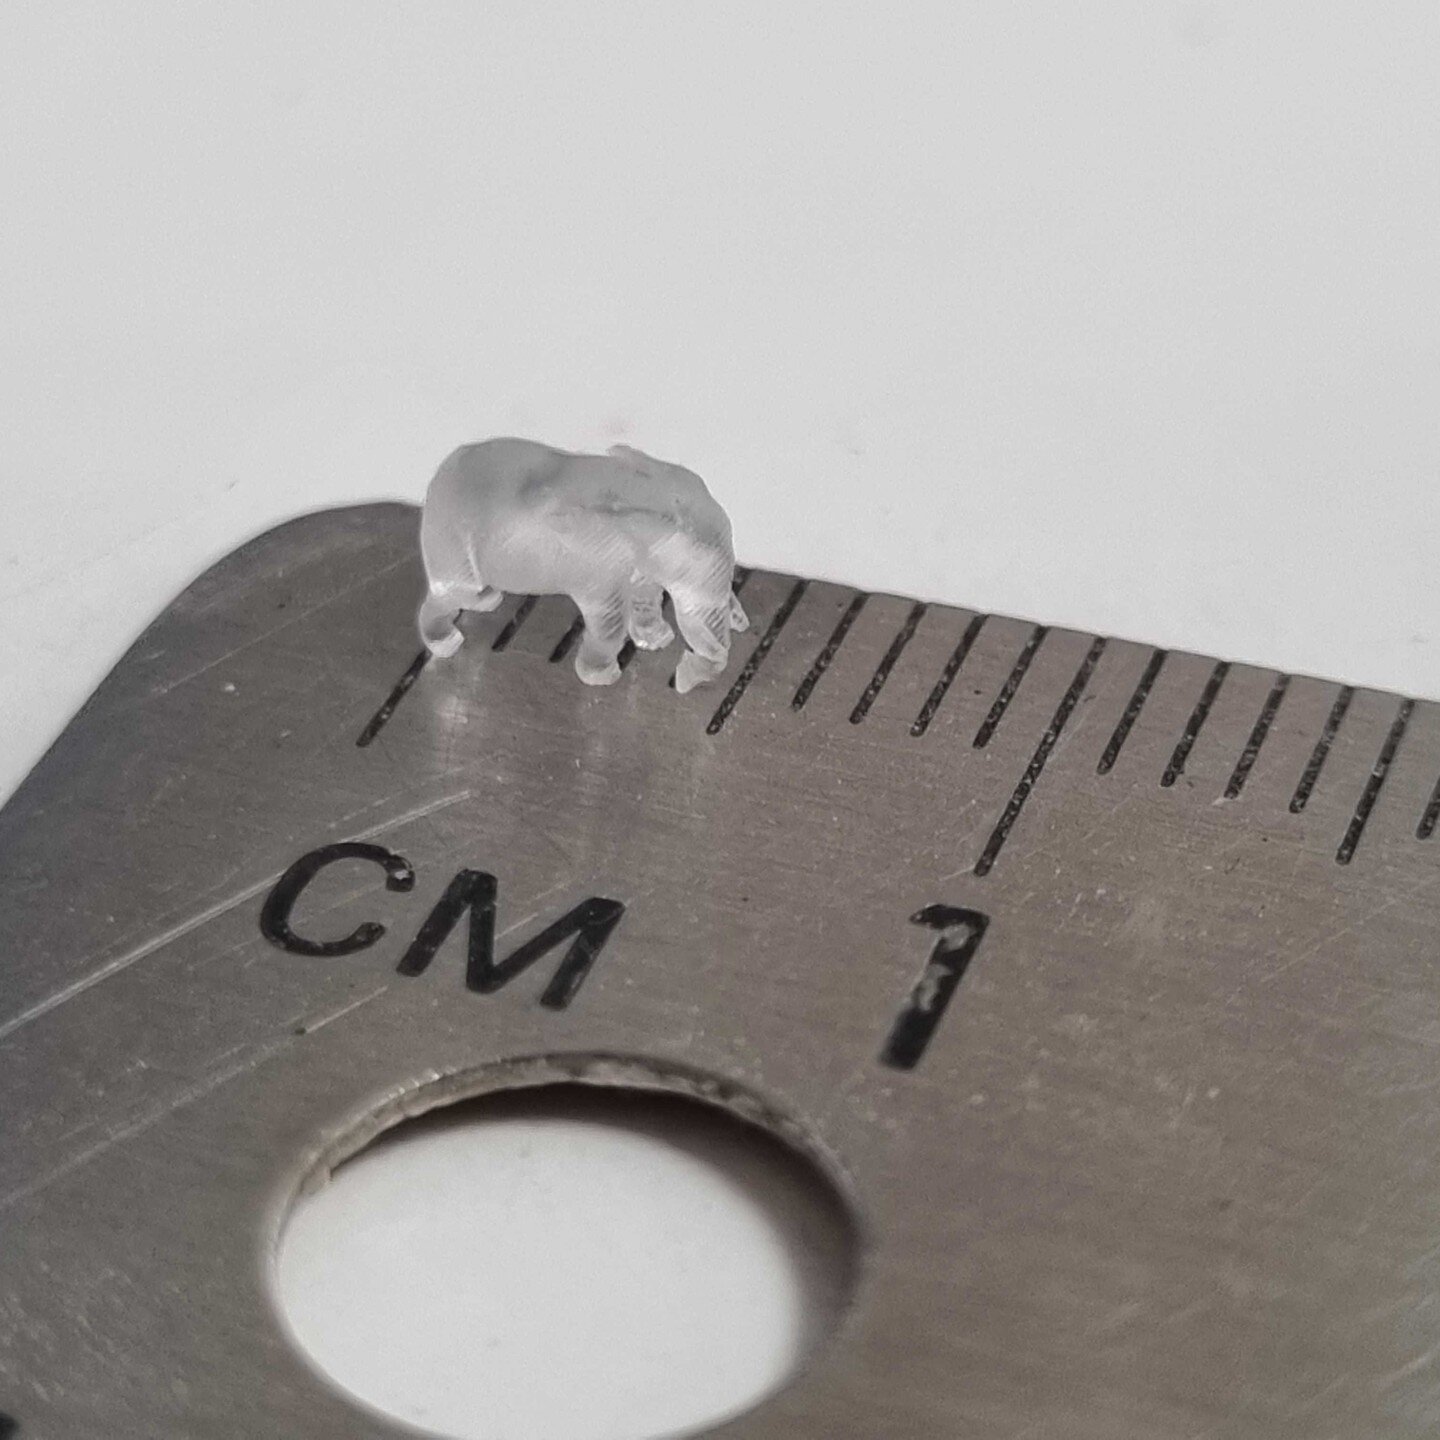 How small can go on our #stereolithography #3dprinters ...as small as this and as big as 800 x 800 x 600mm #3dprinting #3dprint